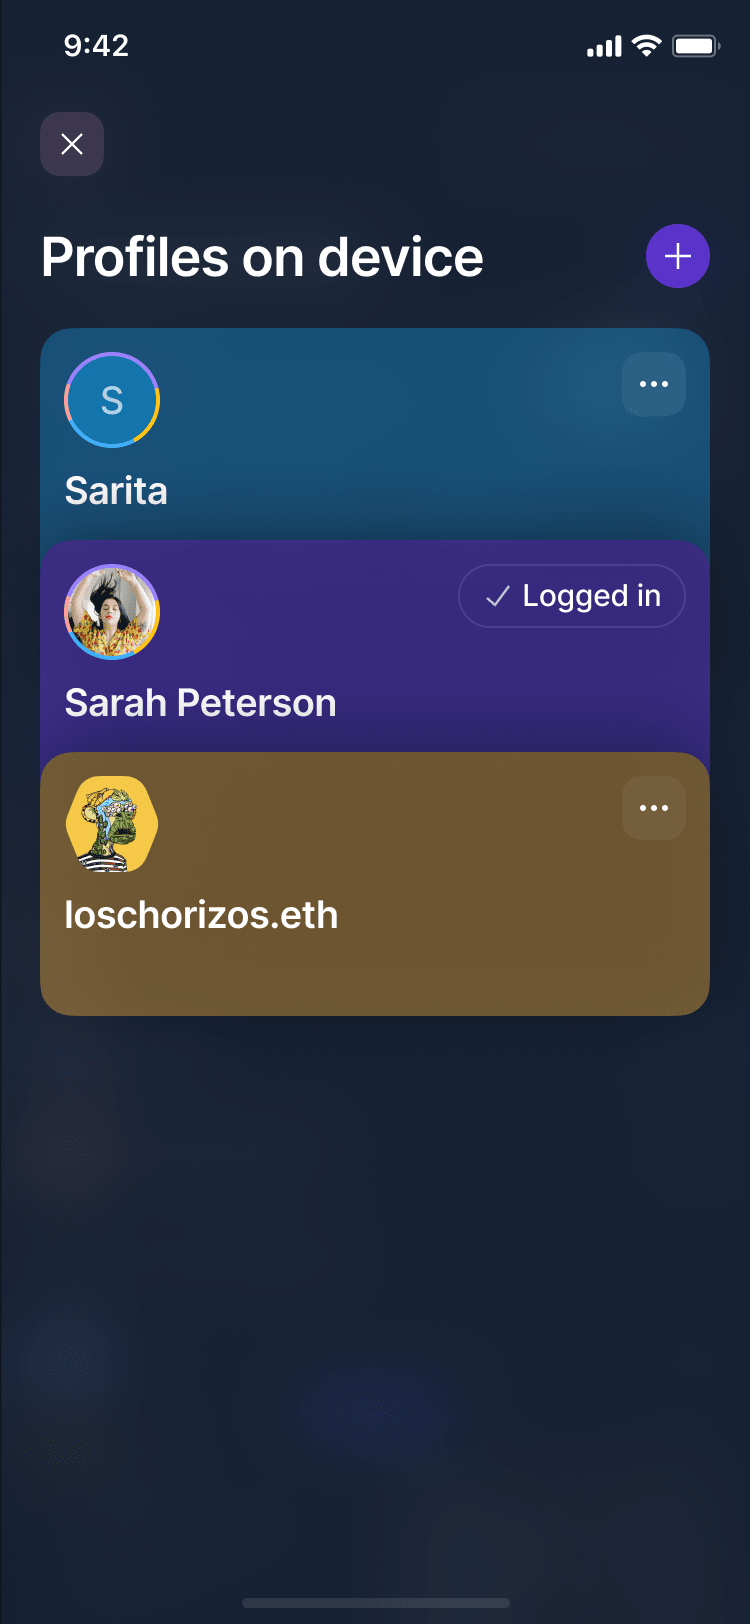 Mobile app screenshot showing the multiple accounts feature that allows users to switch between multiple fully independent identities, a convenient feature if the user is sharing their devices between family and friends or has different online identities